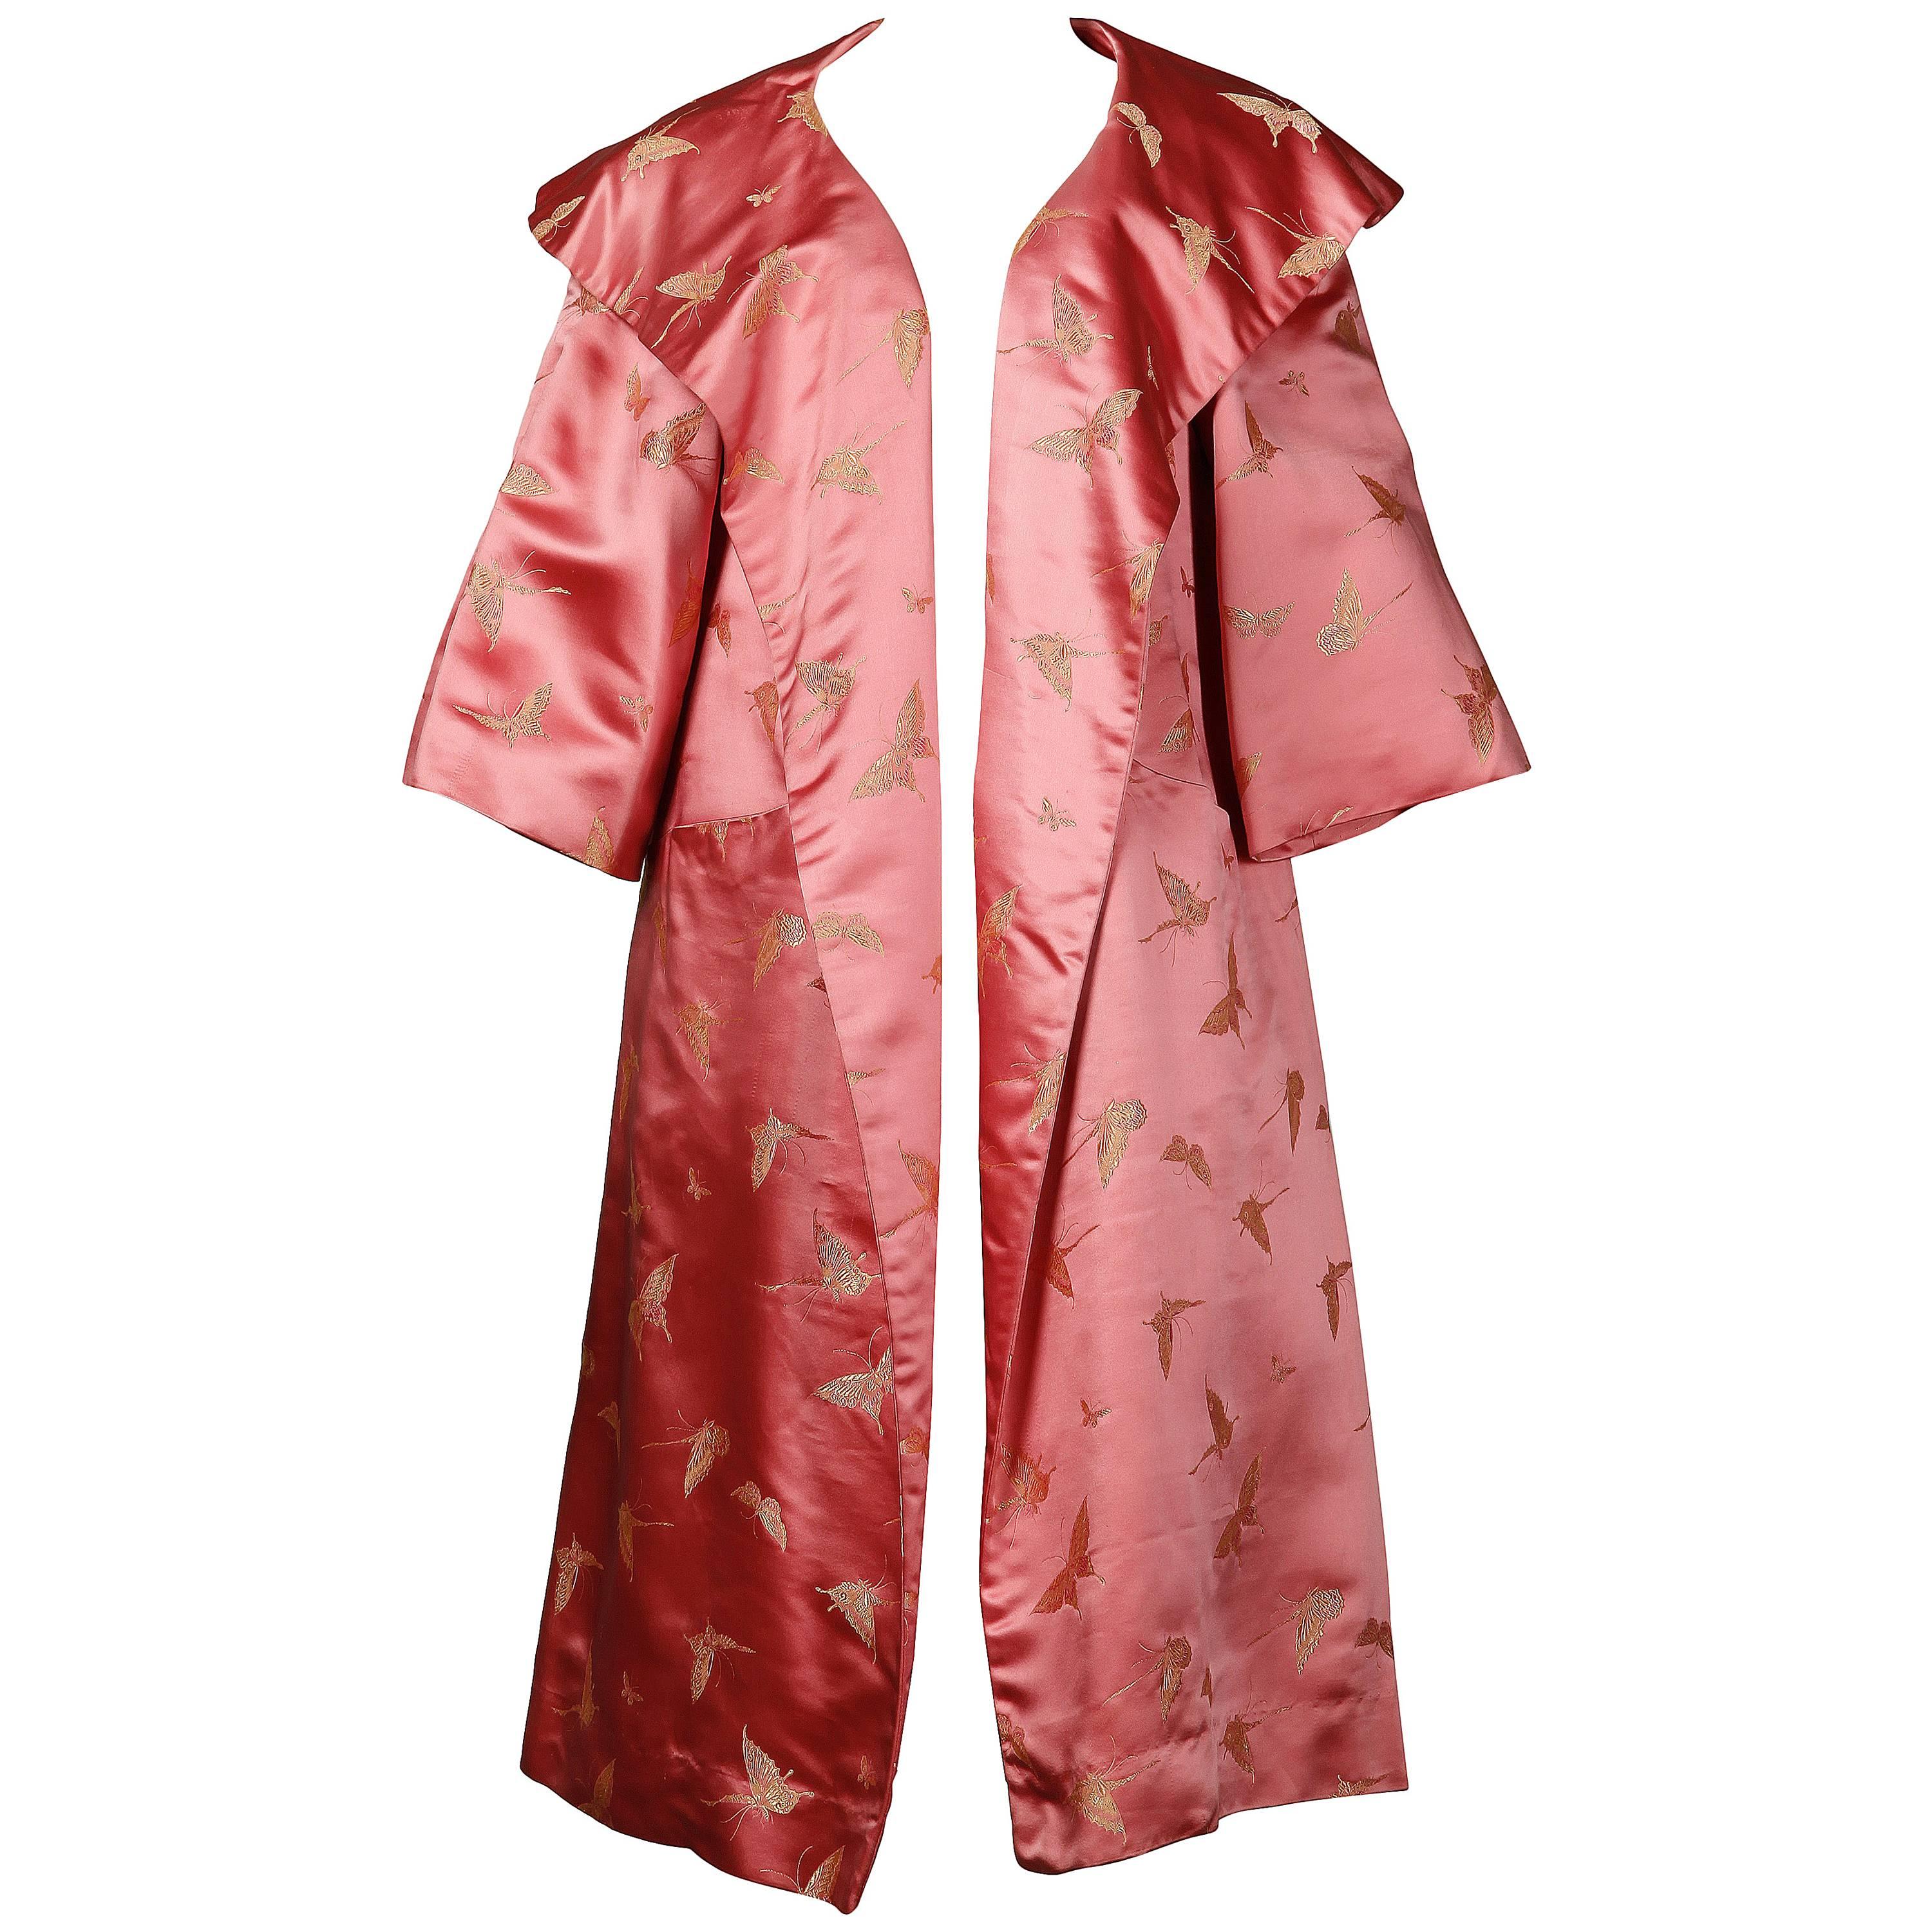 Dynasty Vintage 1960s Pink Silk Satin Swing Coat with Gold 